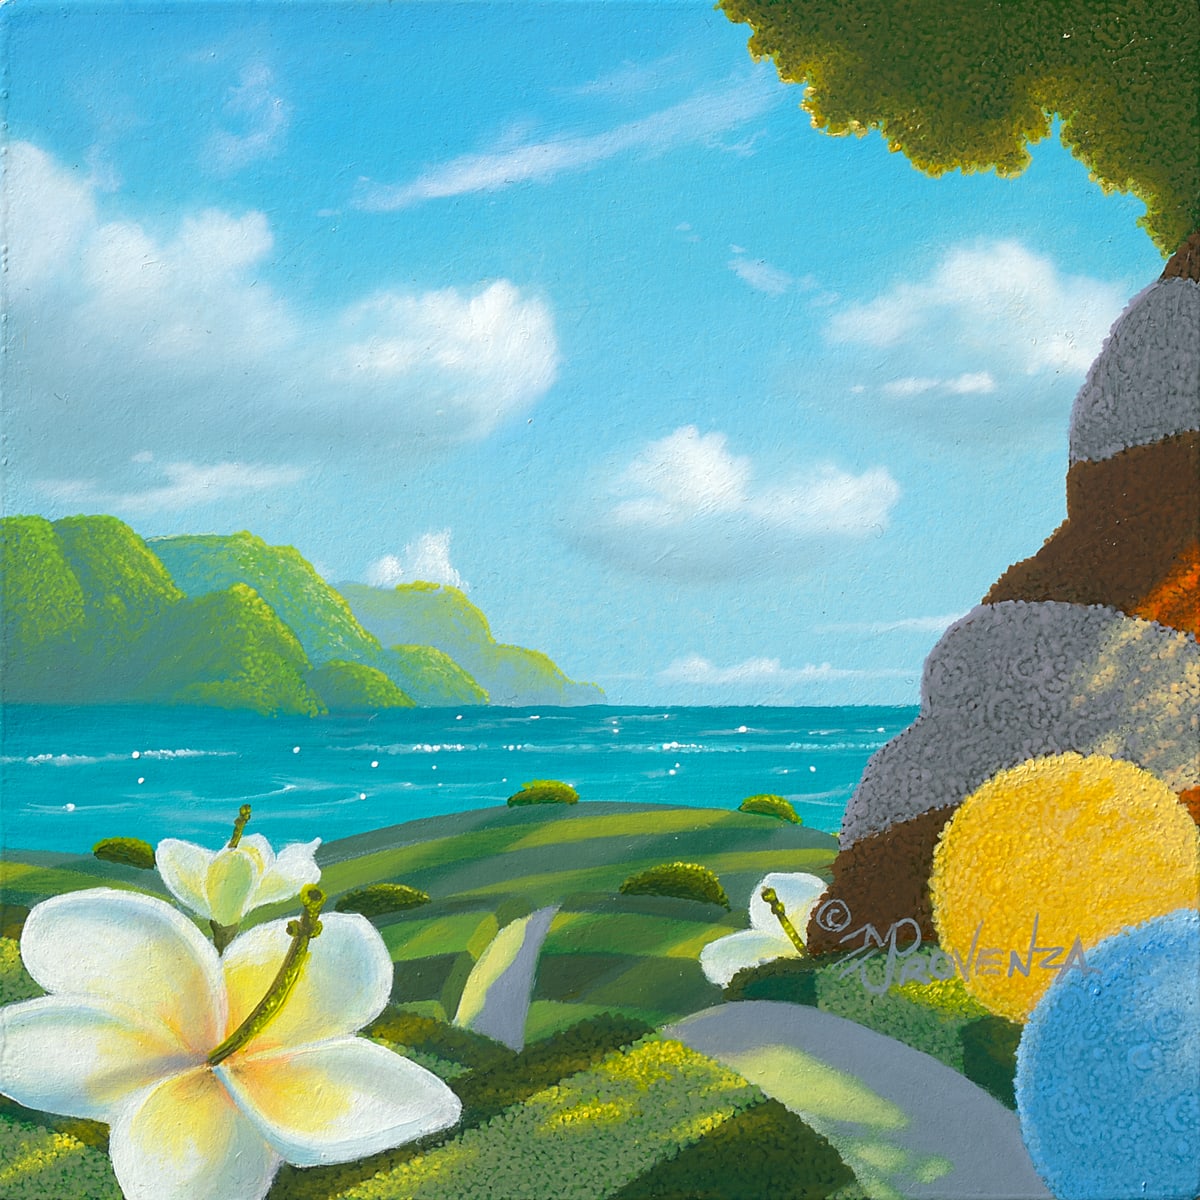 Island Pathway by Michael Provenza  Image: “Island Pathway” 6x6 (oil on board) by Michael Provenza